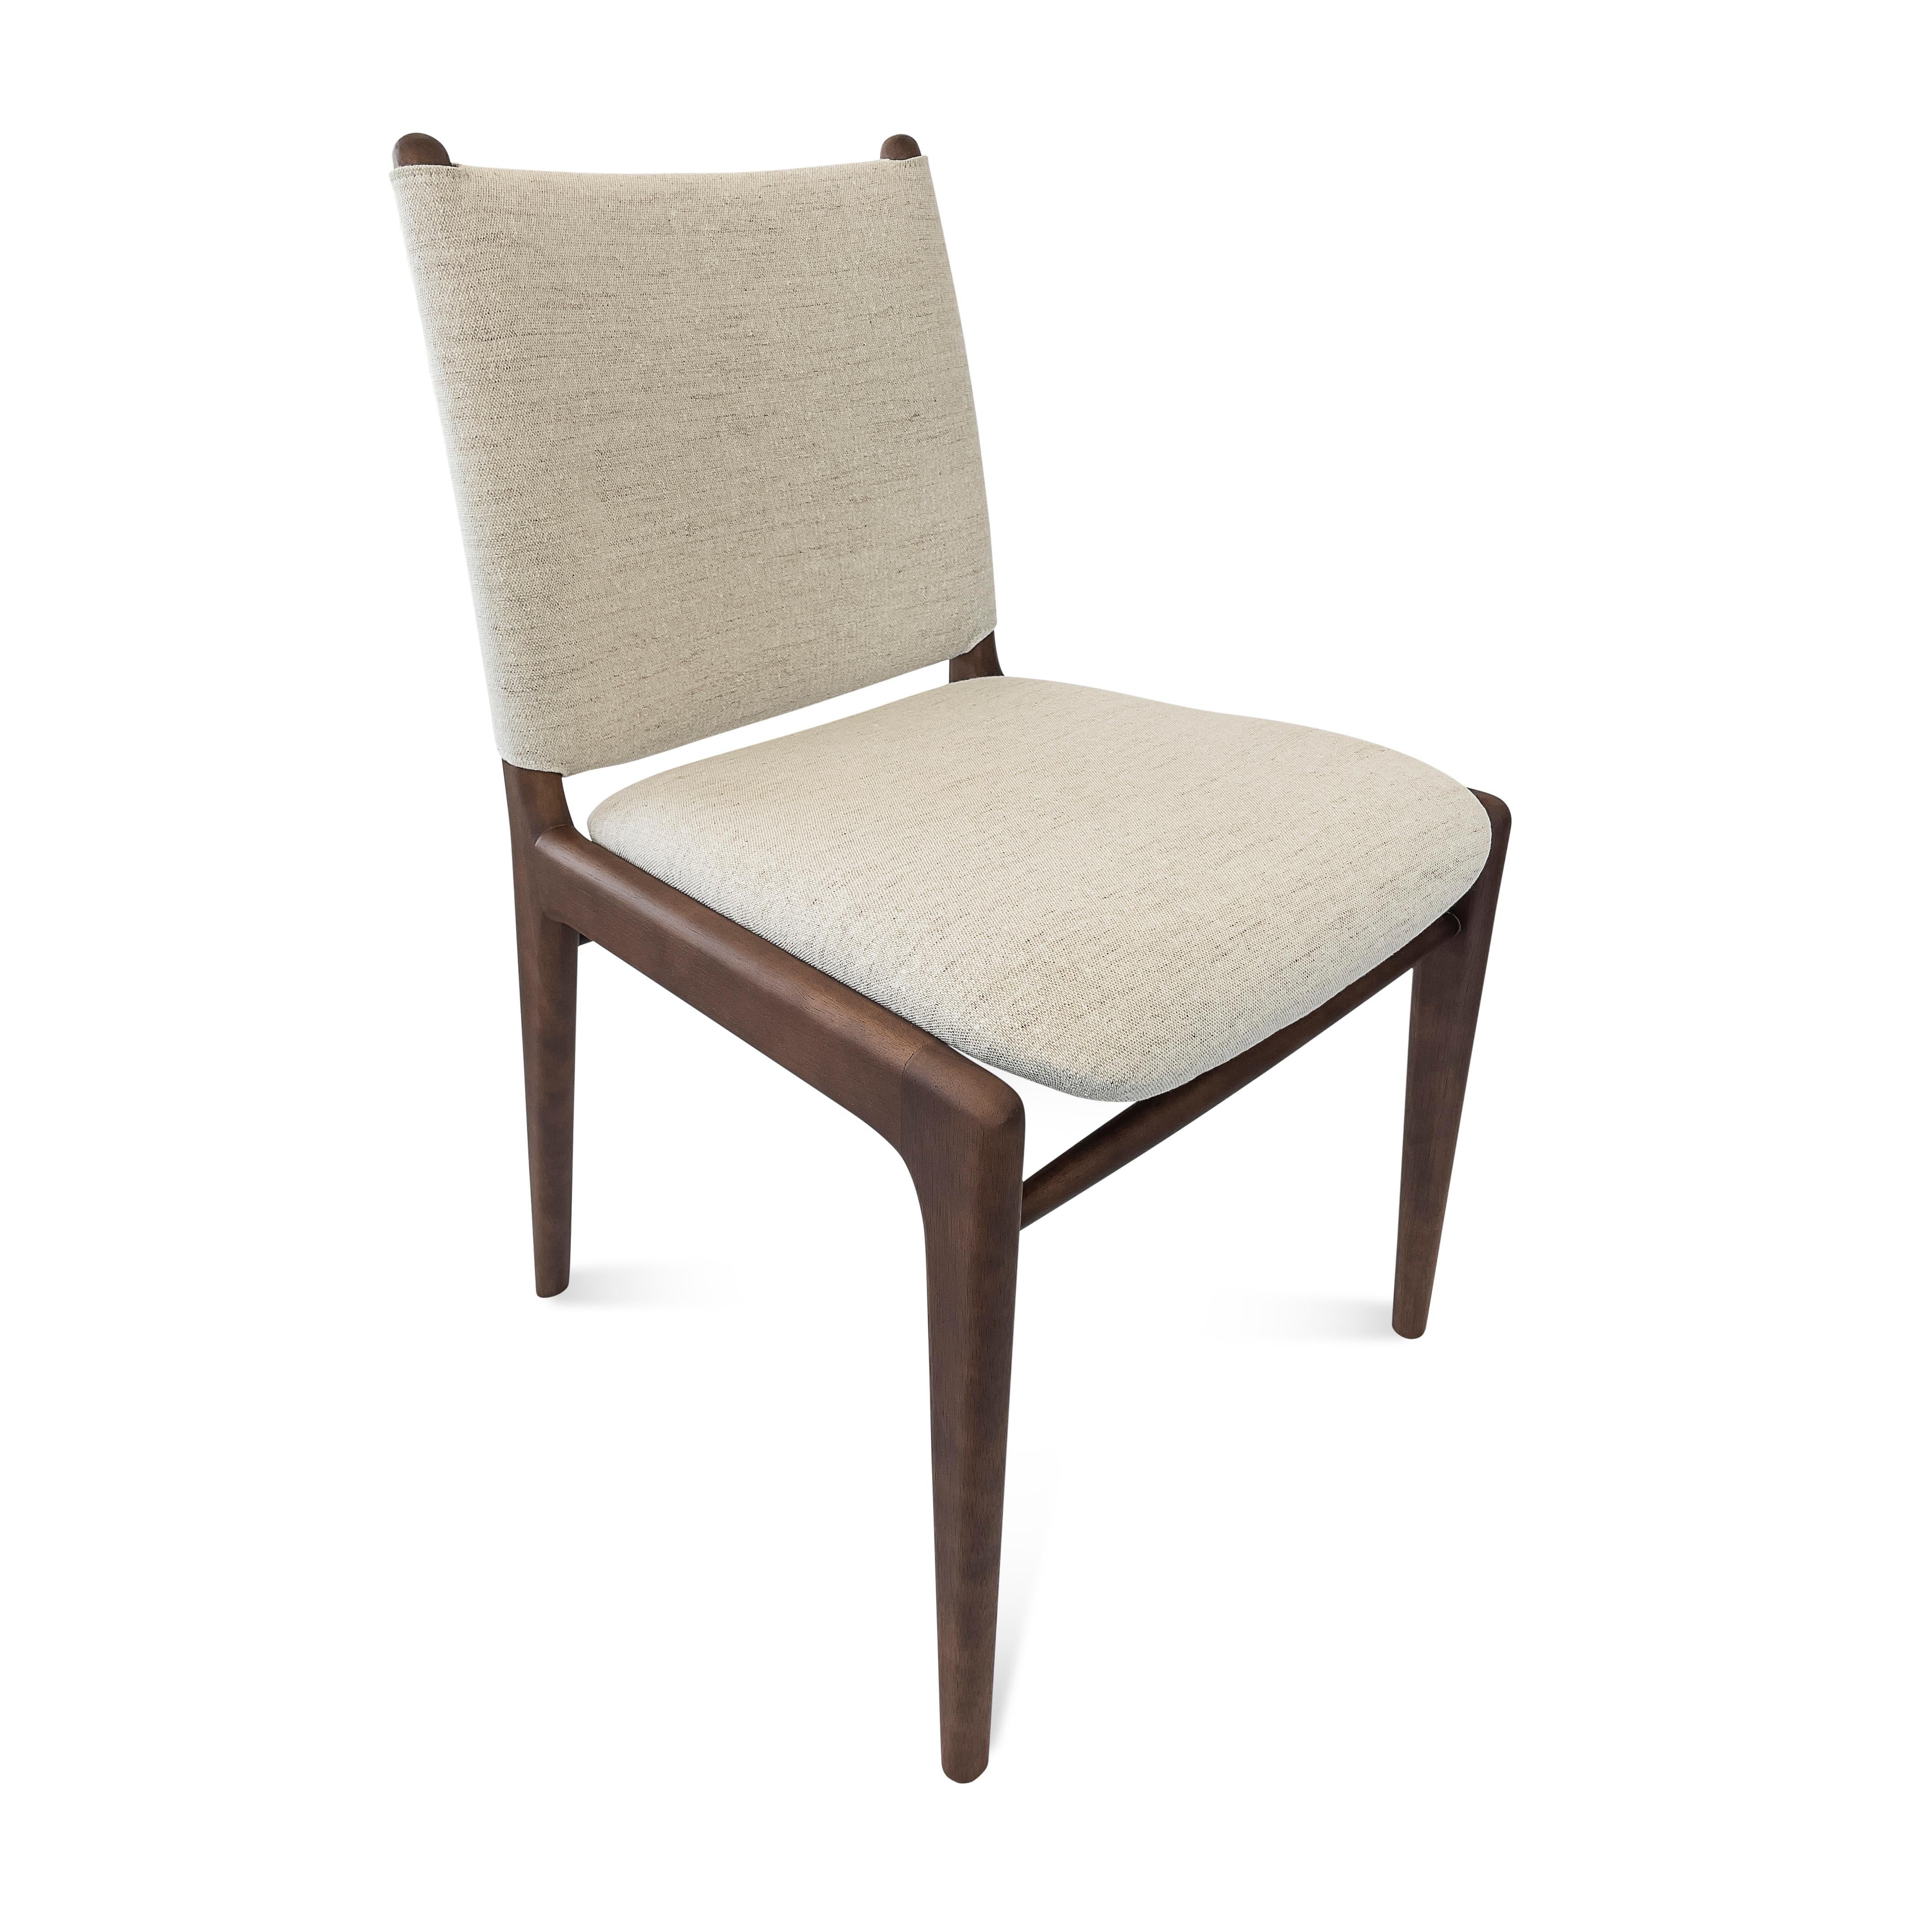 Cappio Dining Chair in Walnut Wood Finish with Light Beige Fabric, set of 2 In New Condition For Sale In Miami, FL